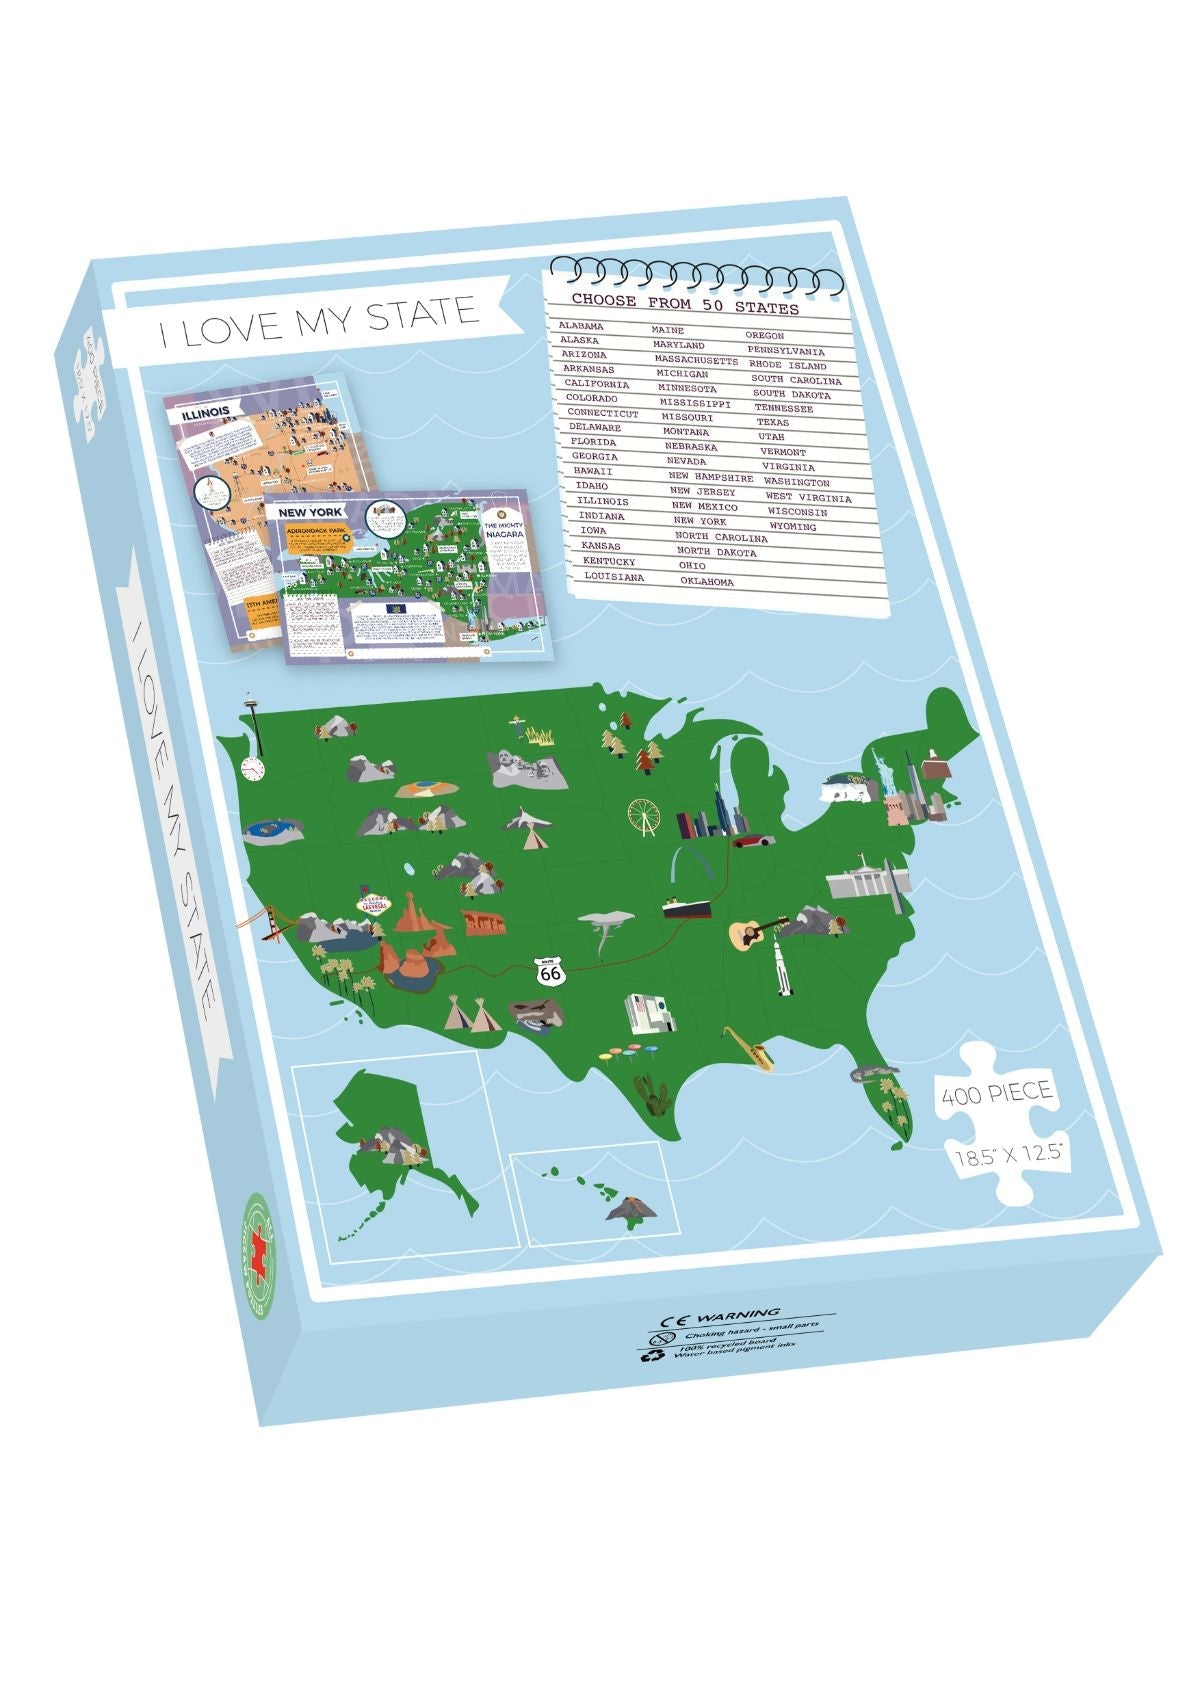 Vermont - I Love My State 400 Piece Personalized Jigsaw Puzzle